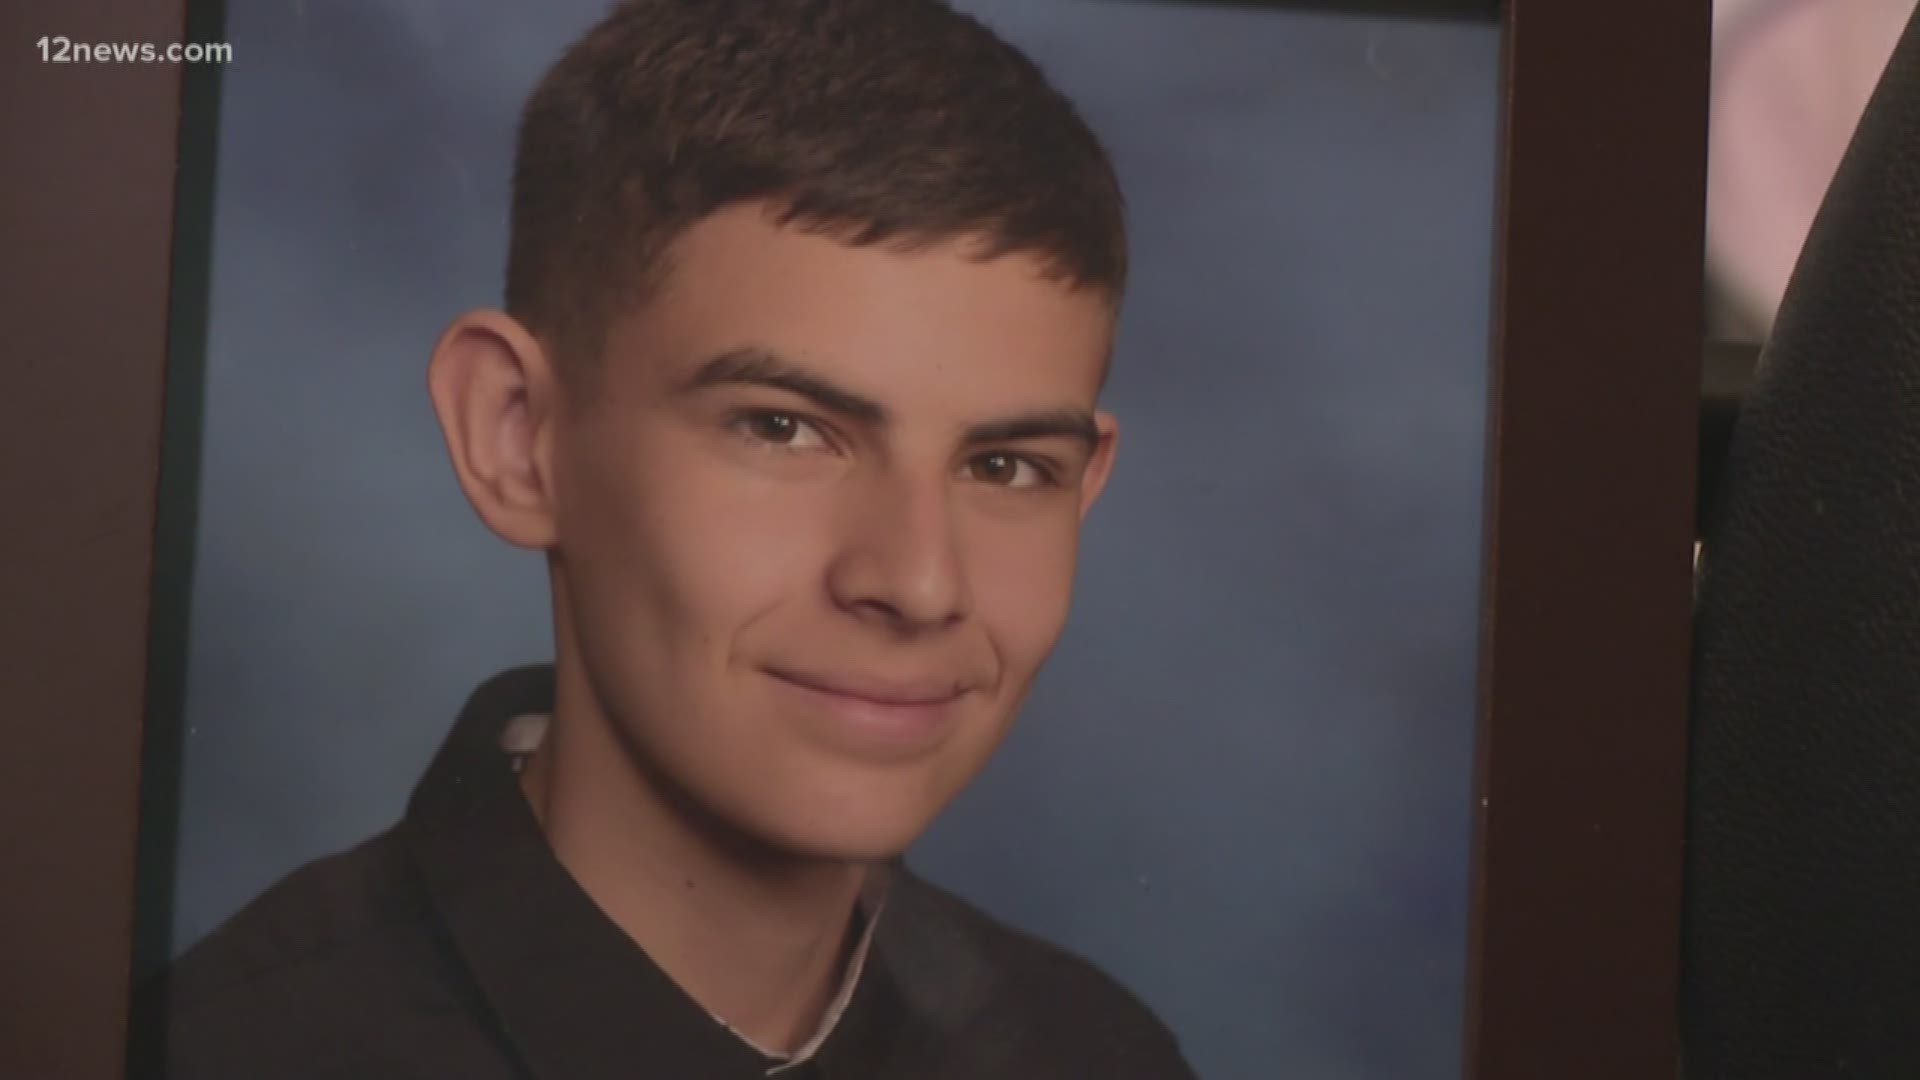 A Chandler High School valedictorian's suicide has prompted an investigation into whether someone on the internet provoked him to take his own life.